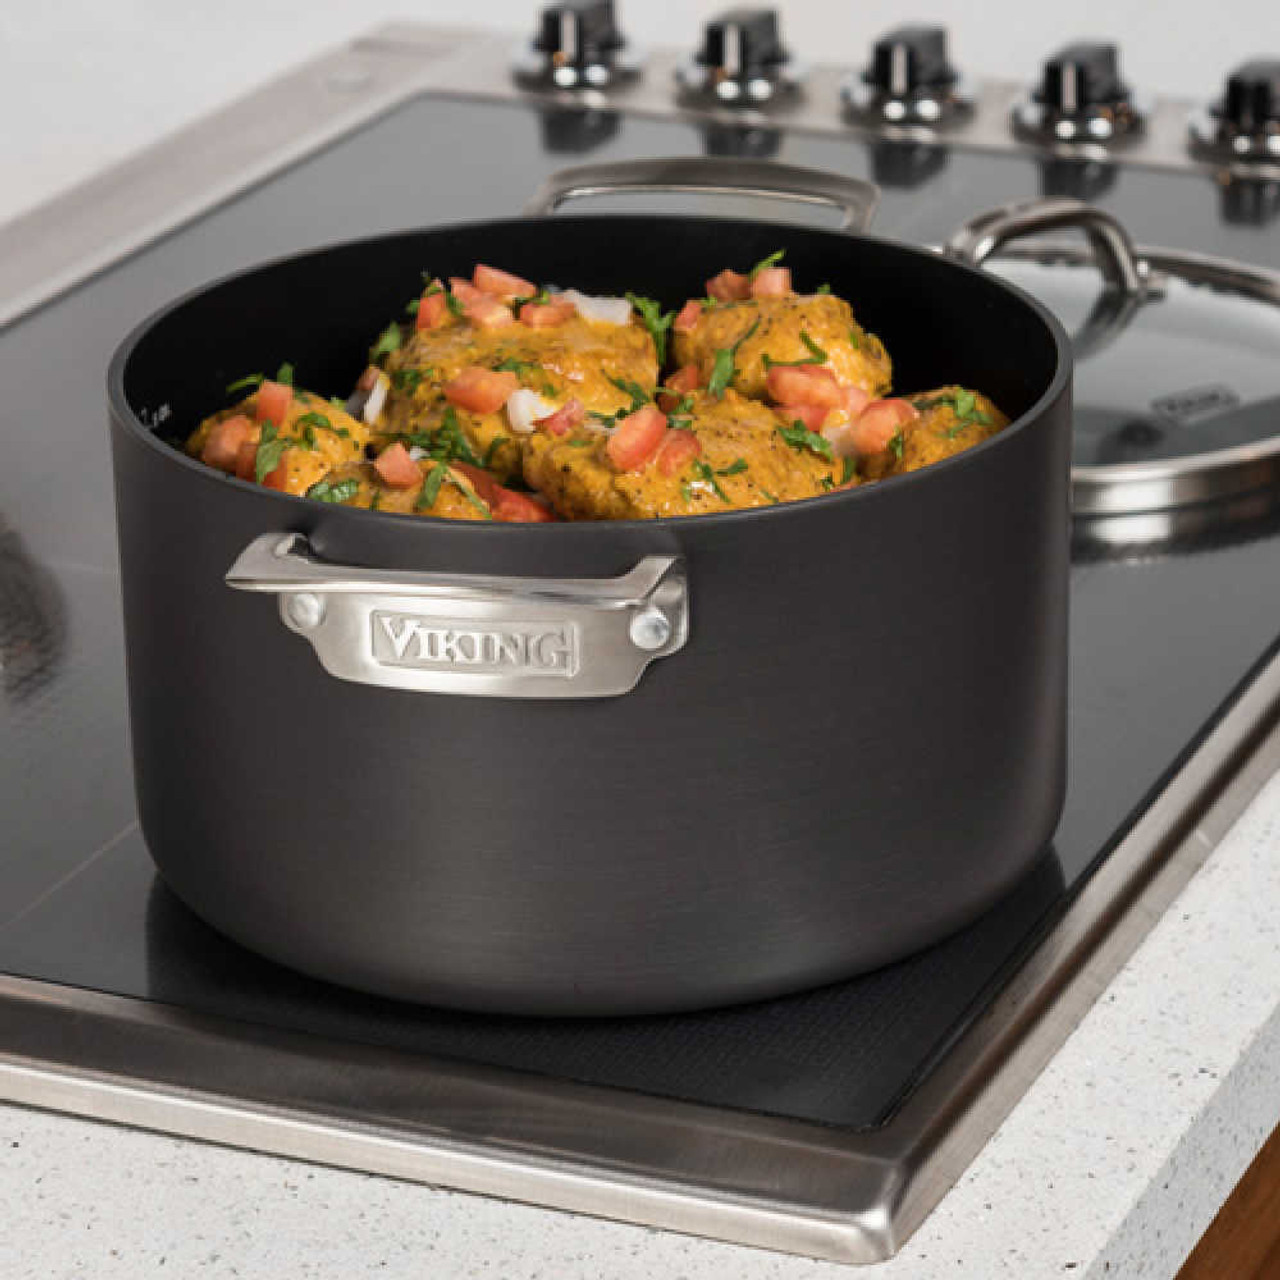 https://cdn11.bigcommerce.com/s-hccytny0od/images/stencil/1280x1280/products/4819/19676/Viking_Hard_Anodized_Nonstick_Dutch_Oven_2__33198.1656108254.jpg?c=2?imbypass=on